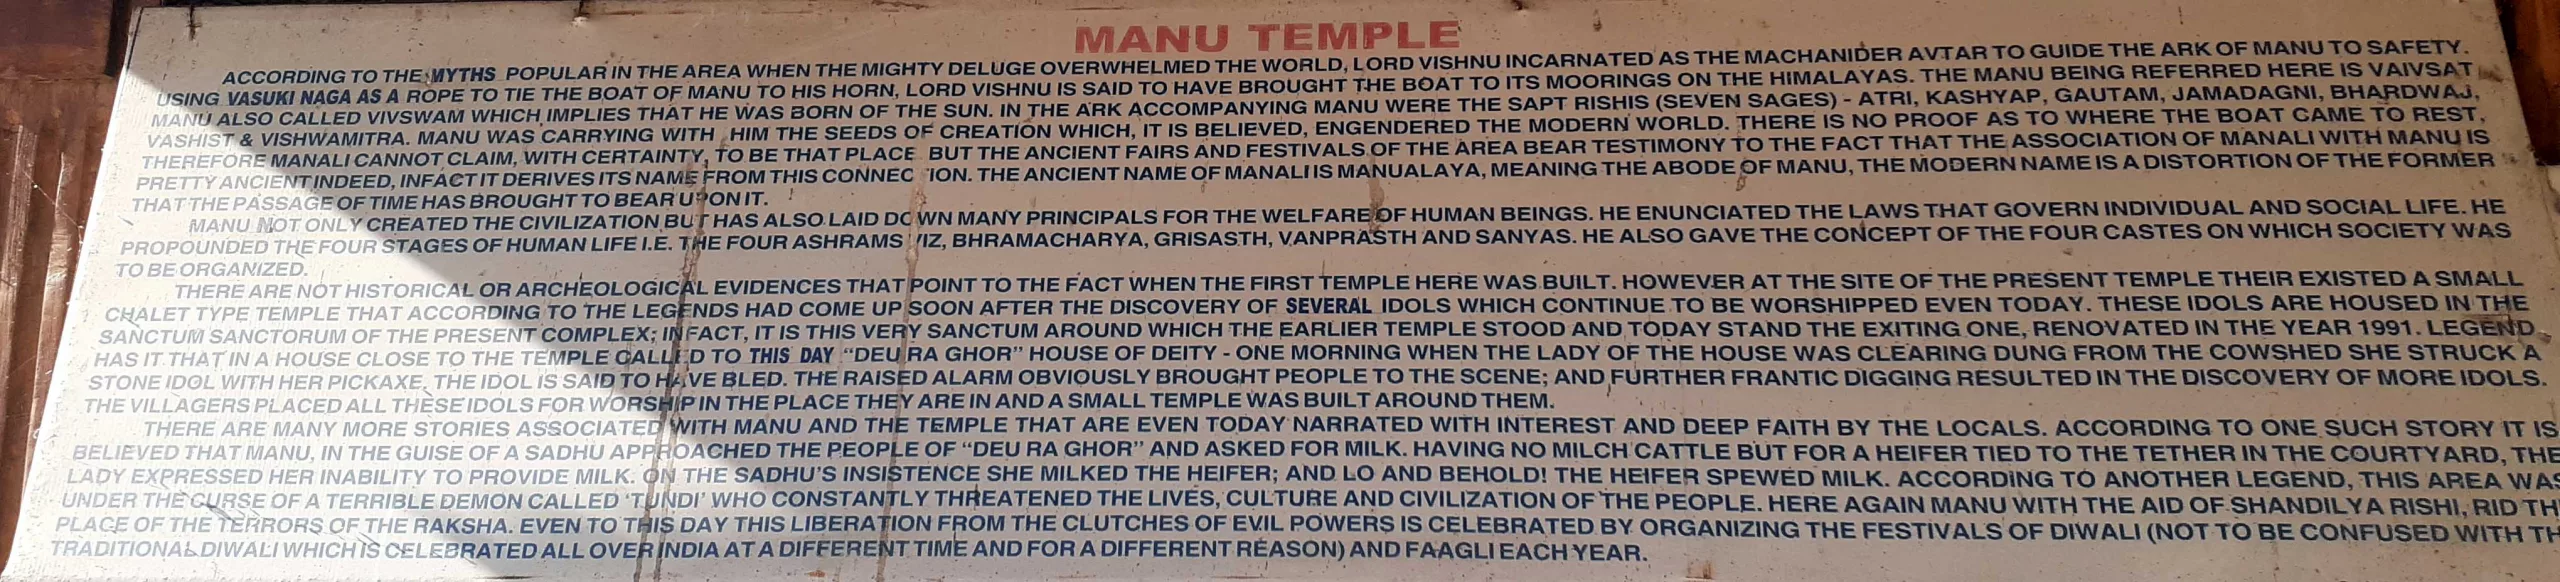 Manu Temple placard informs about the temple's features and history.